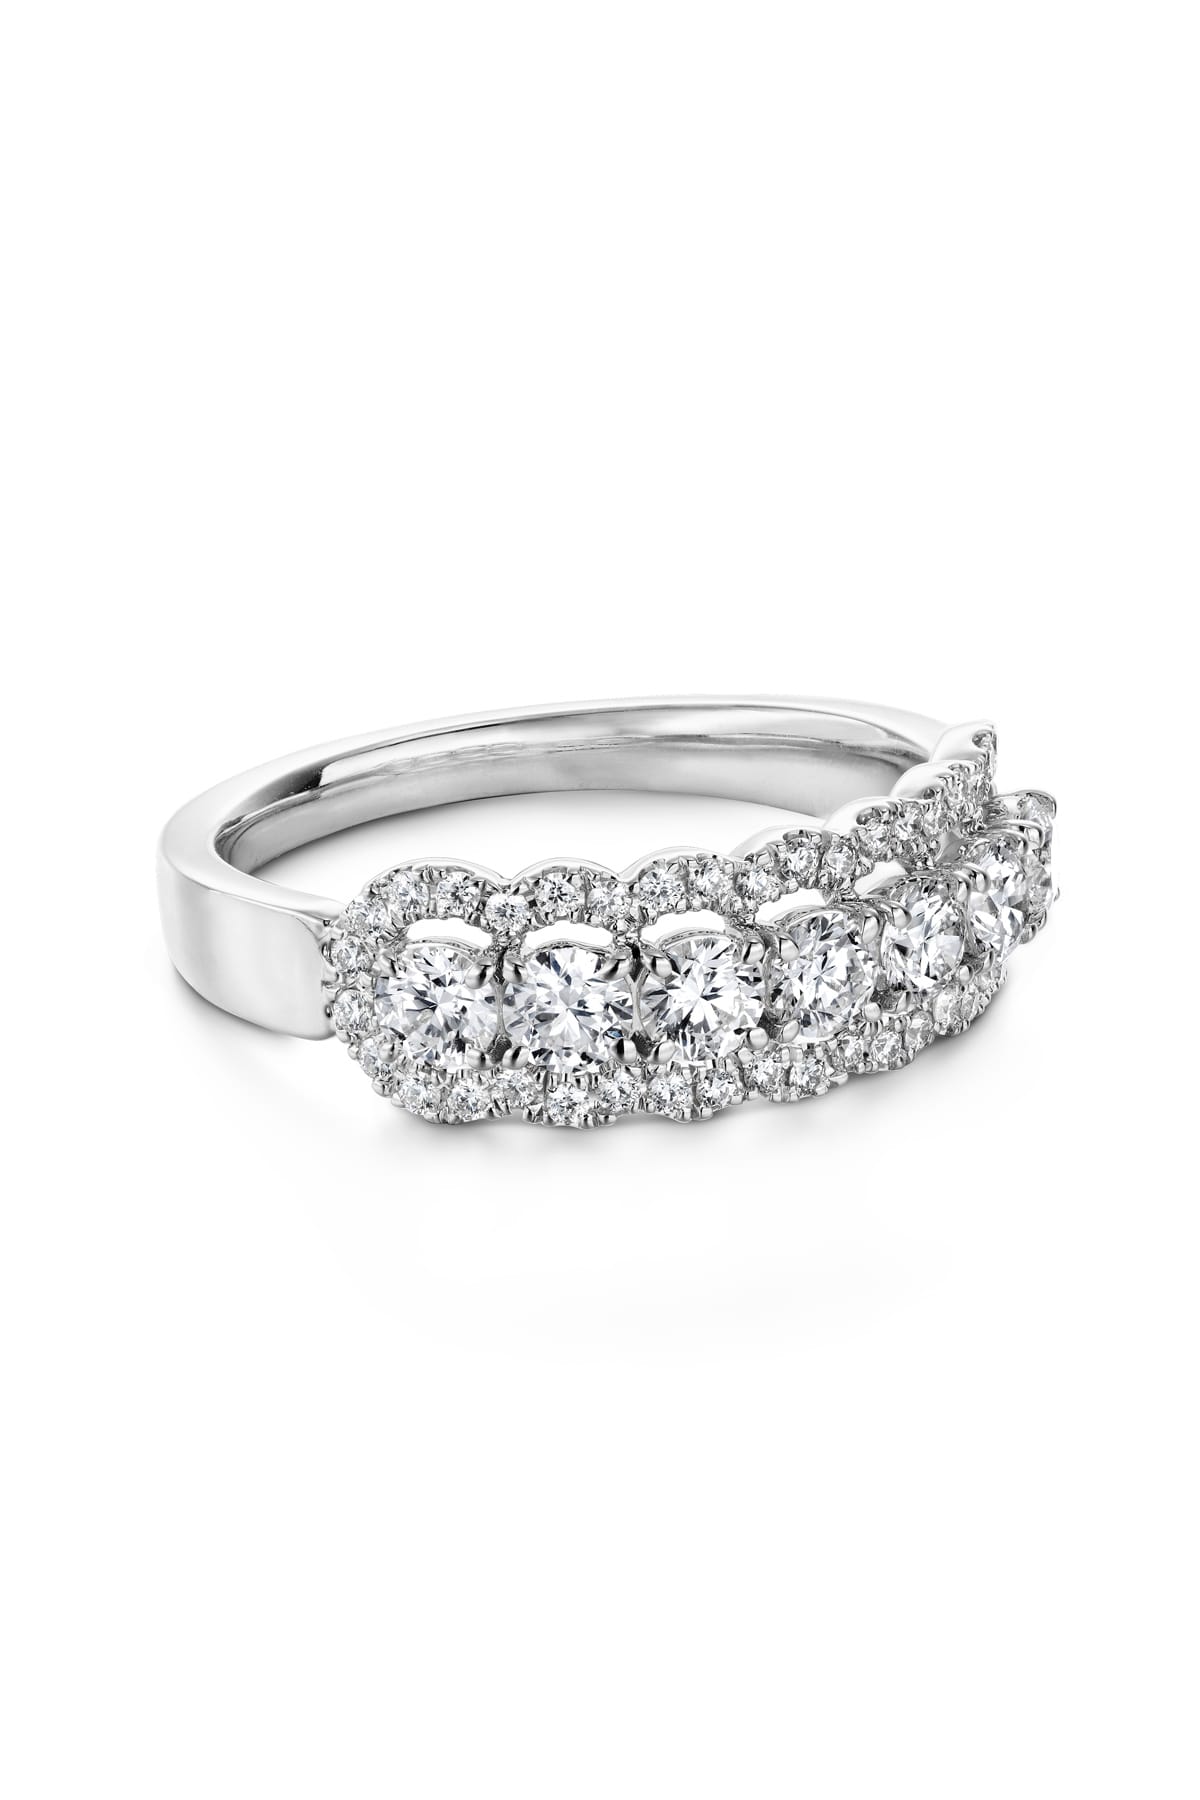 Aurora Seven Diamond Band From Hearts On Fire available at LeGassick Diamonds and Jewellery Gold Coast, Australia.